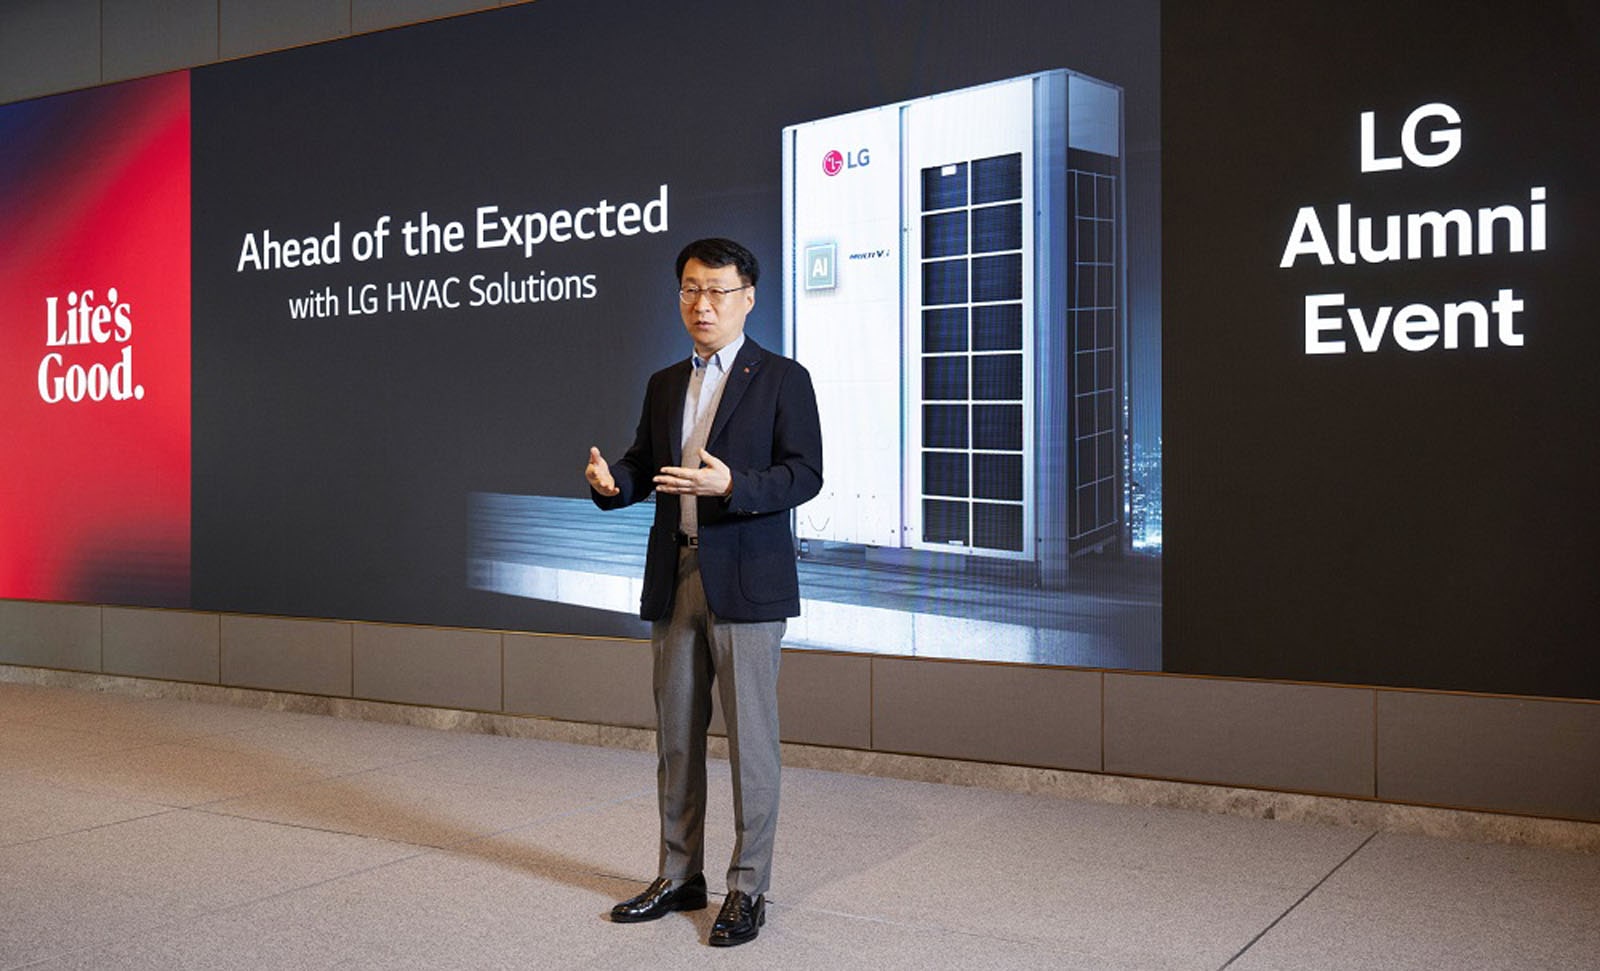 With its high-growth potential, Asia has emerged as a key market for the expansion of LG’s HVAC business